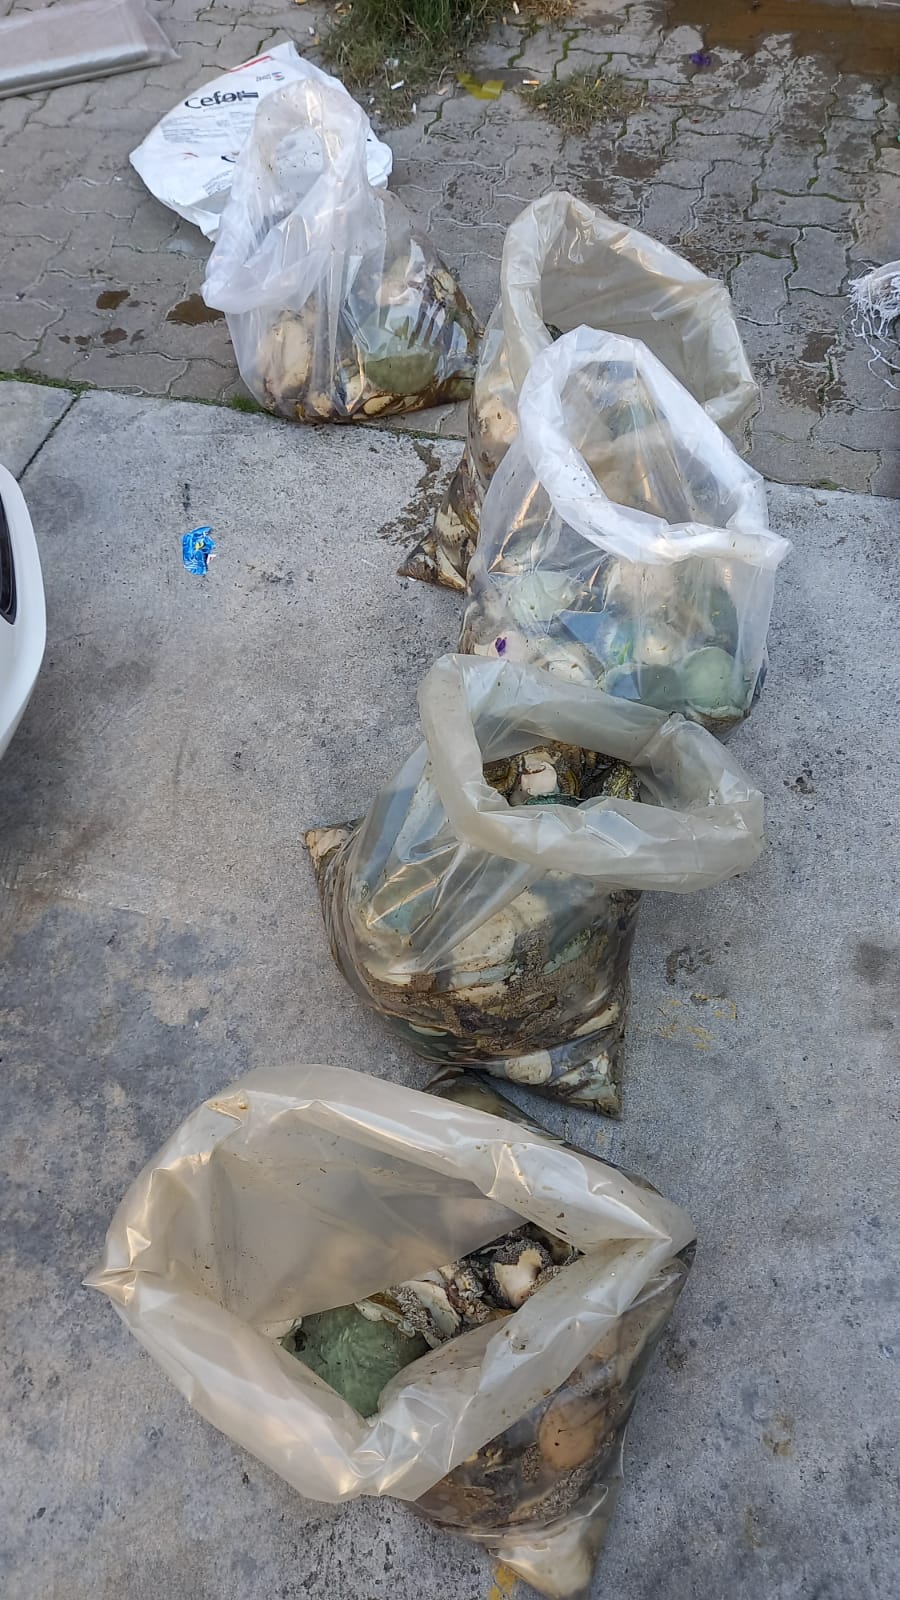 Fish Hoek SAPS members arrest suspect for illegal possession of abalone